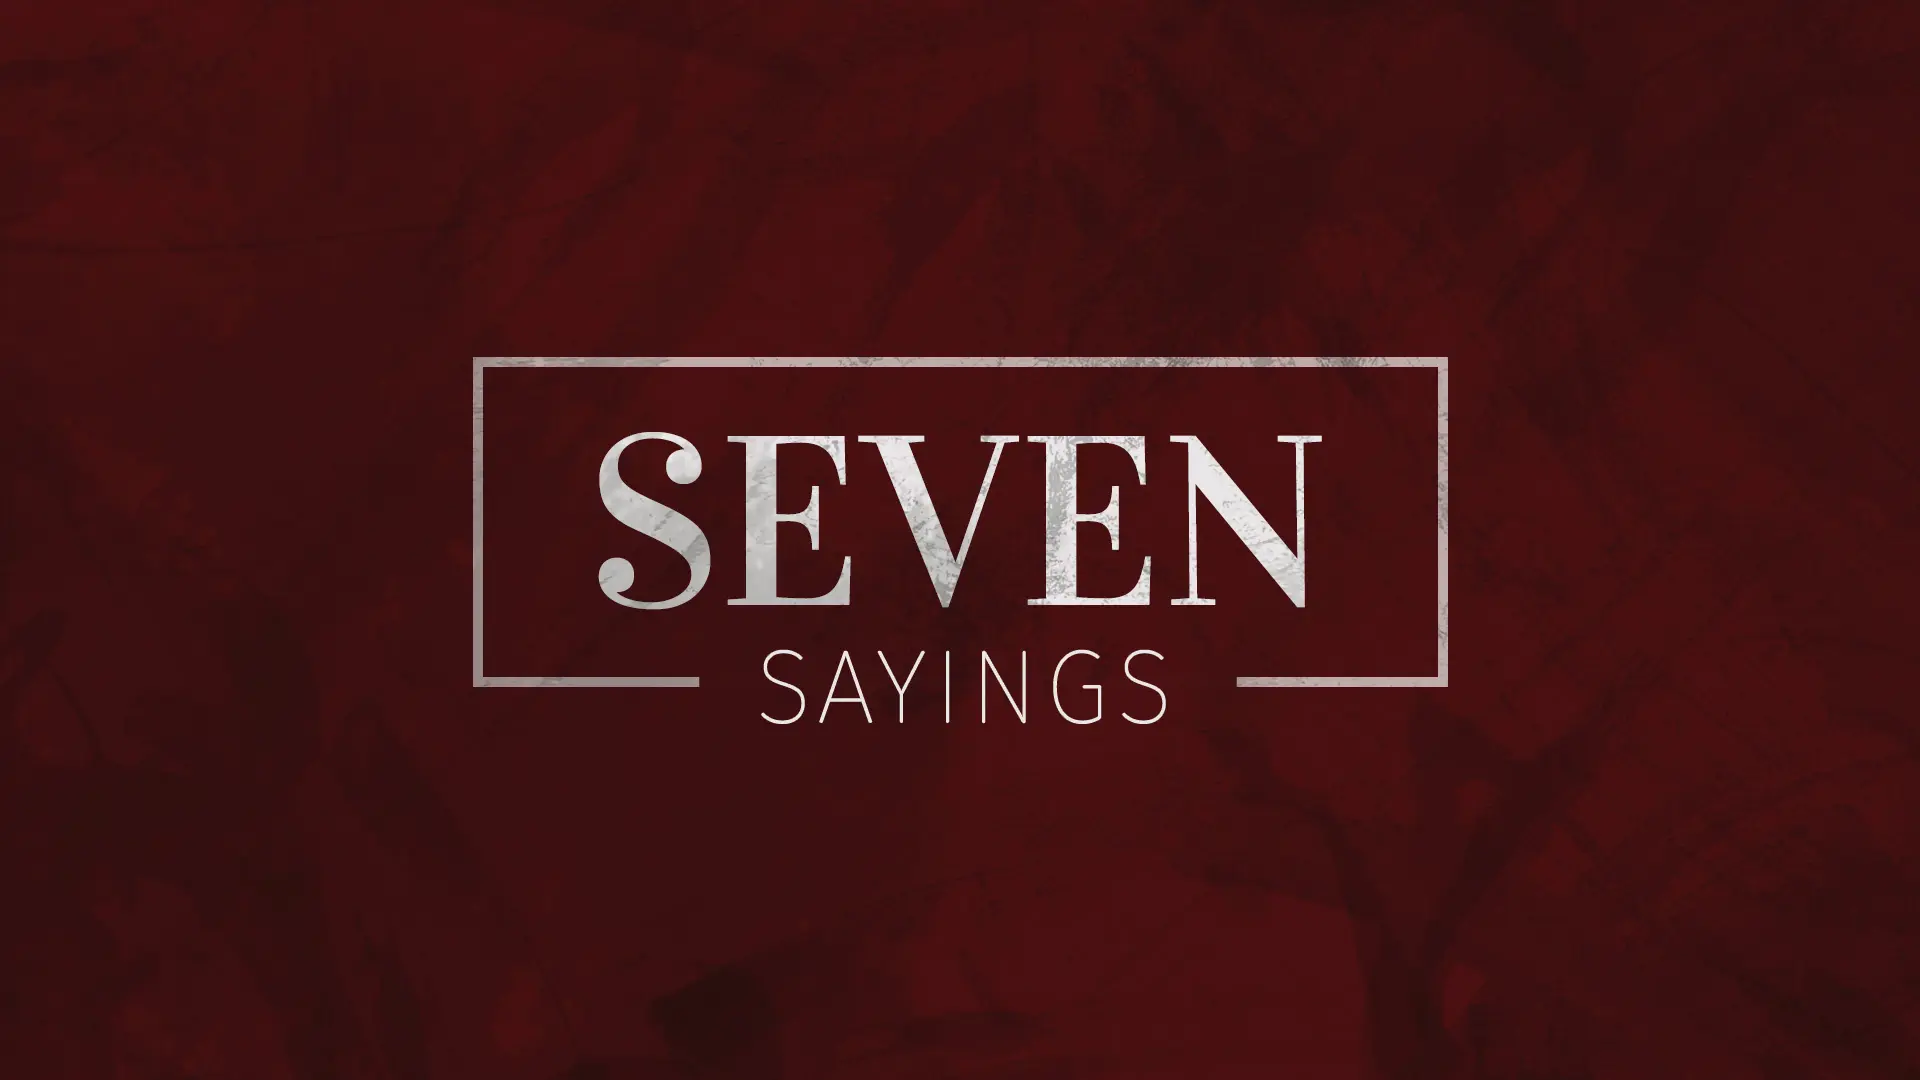 Featured image for “Seven Sayings”